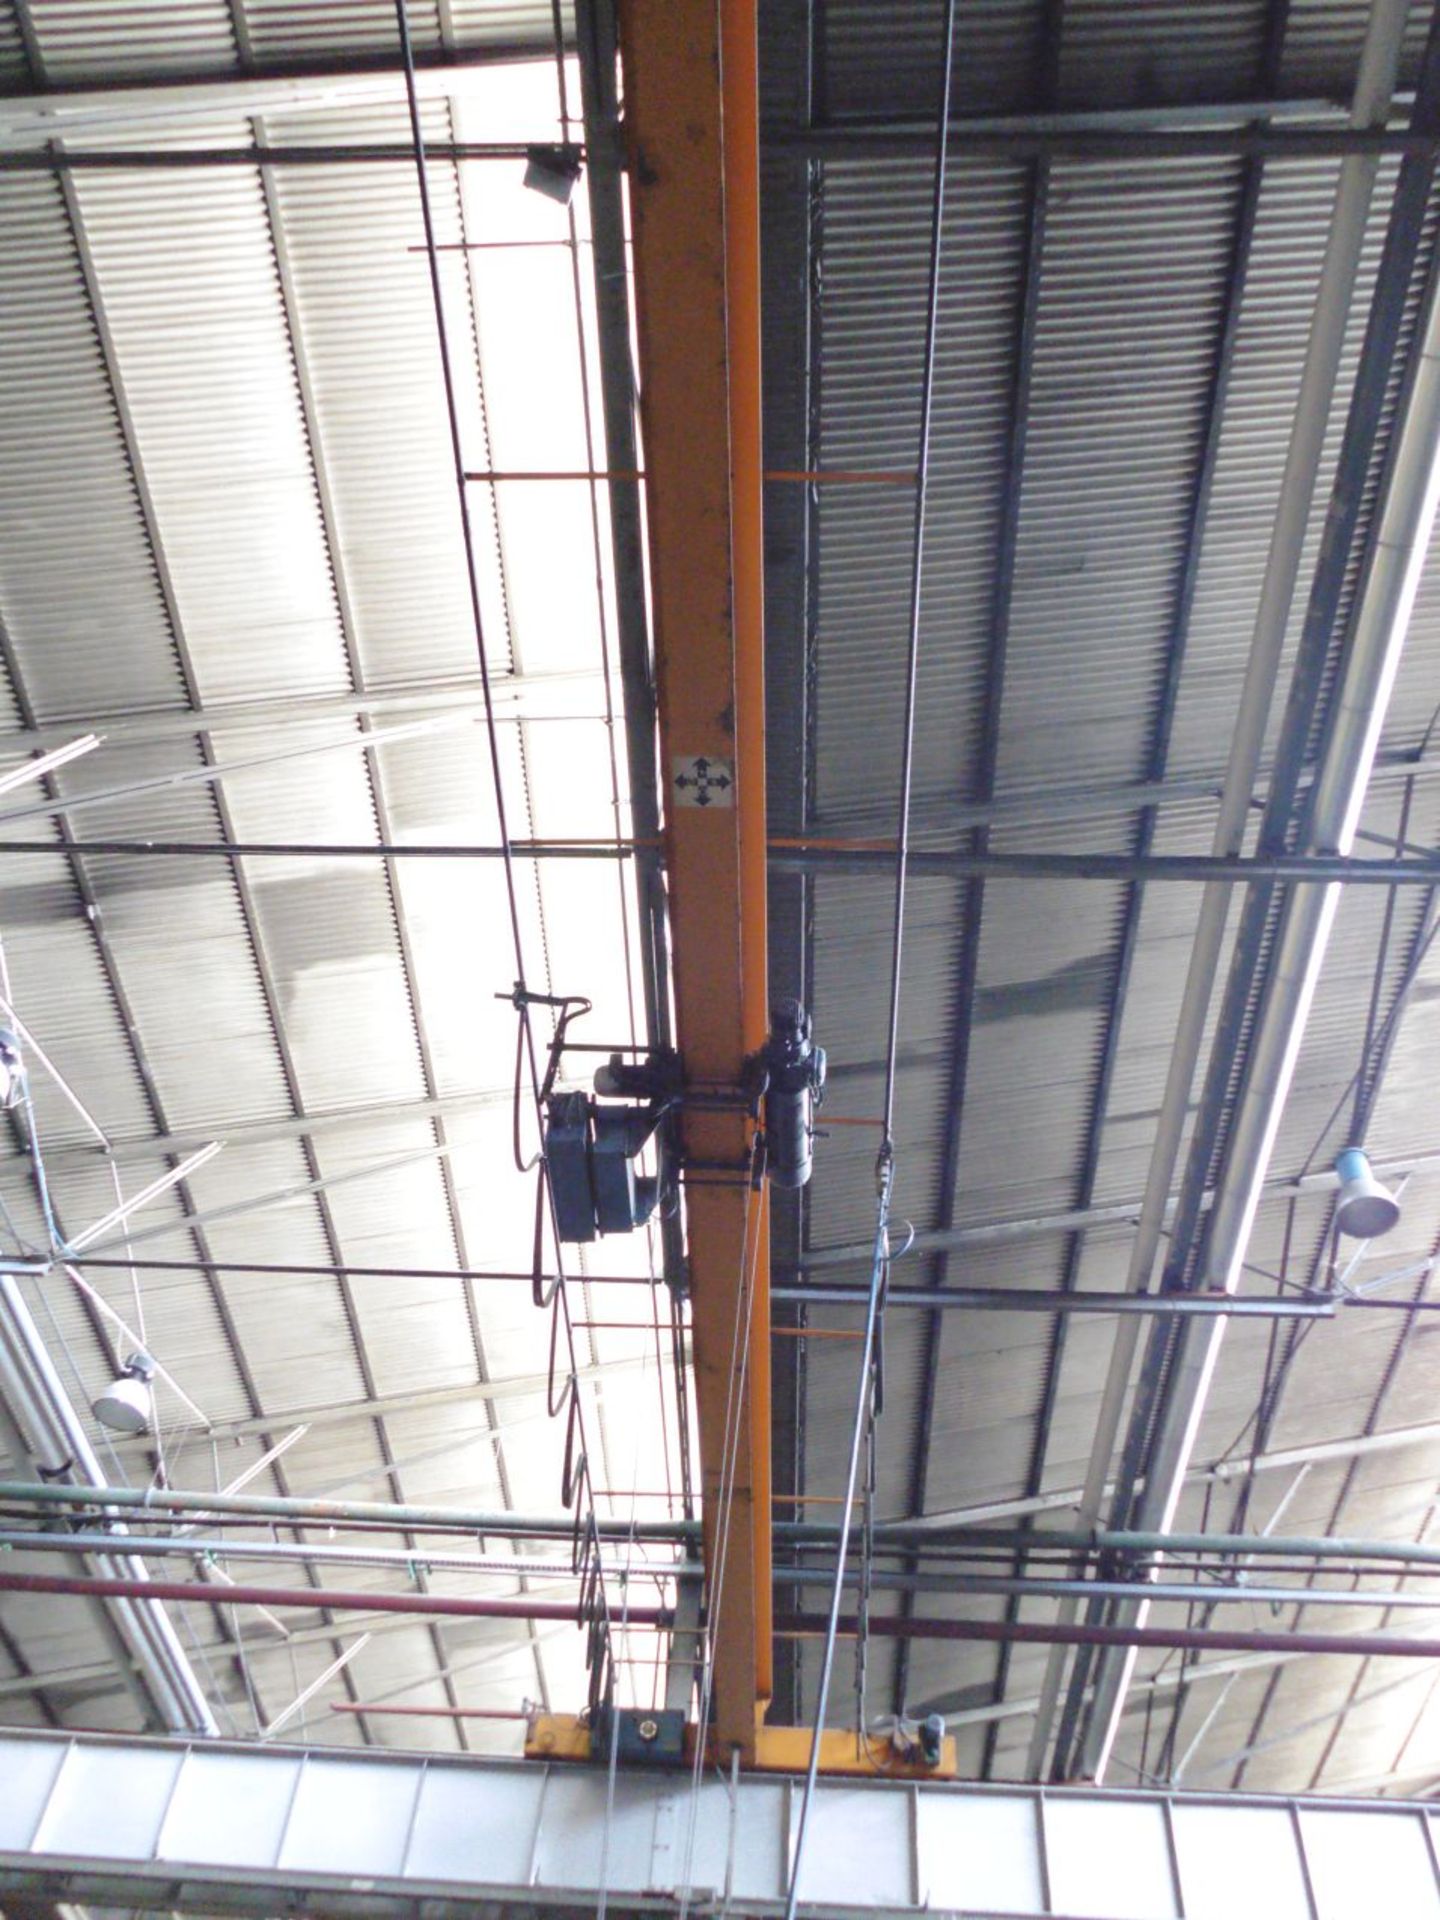 Demag 2 Tonne Single Beam Overhead Travelling Gantry Crane with Pendant Control; span 19m, No - Image 4 of 5